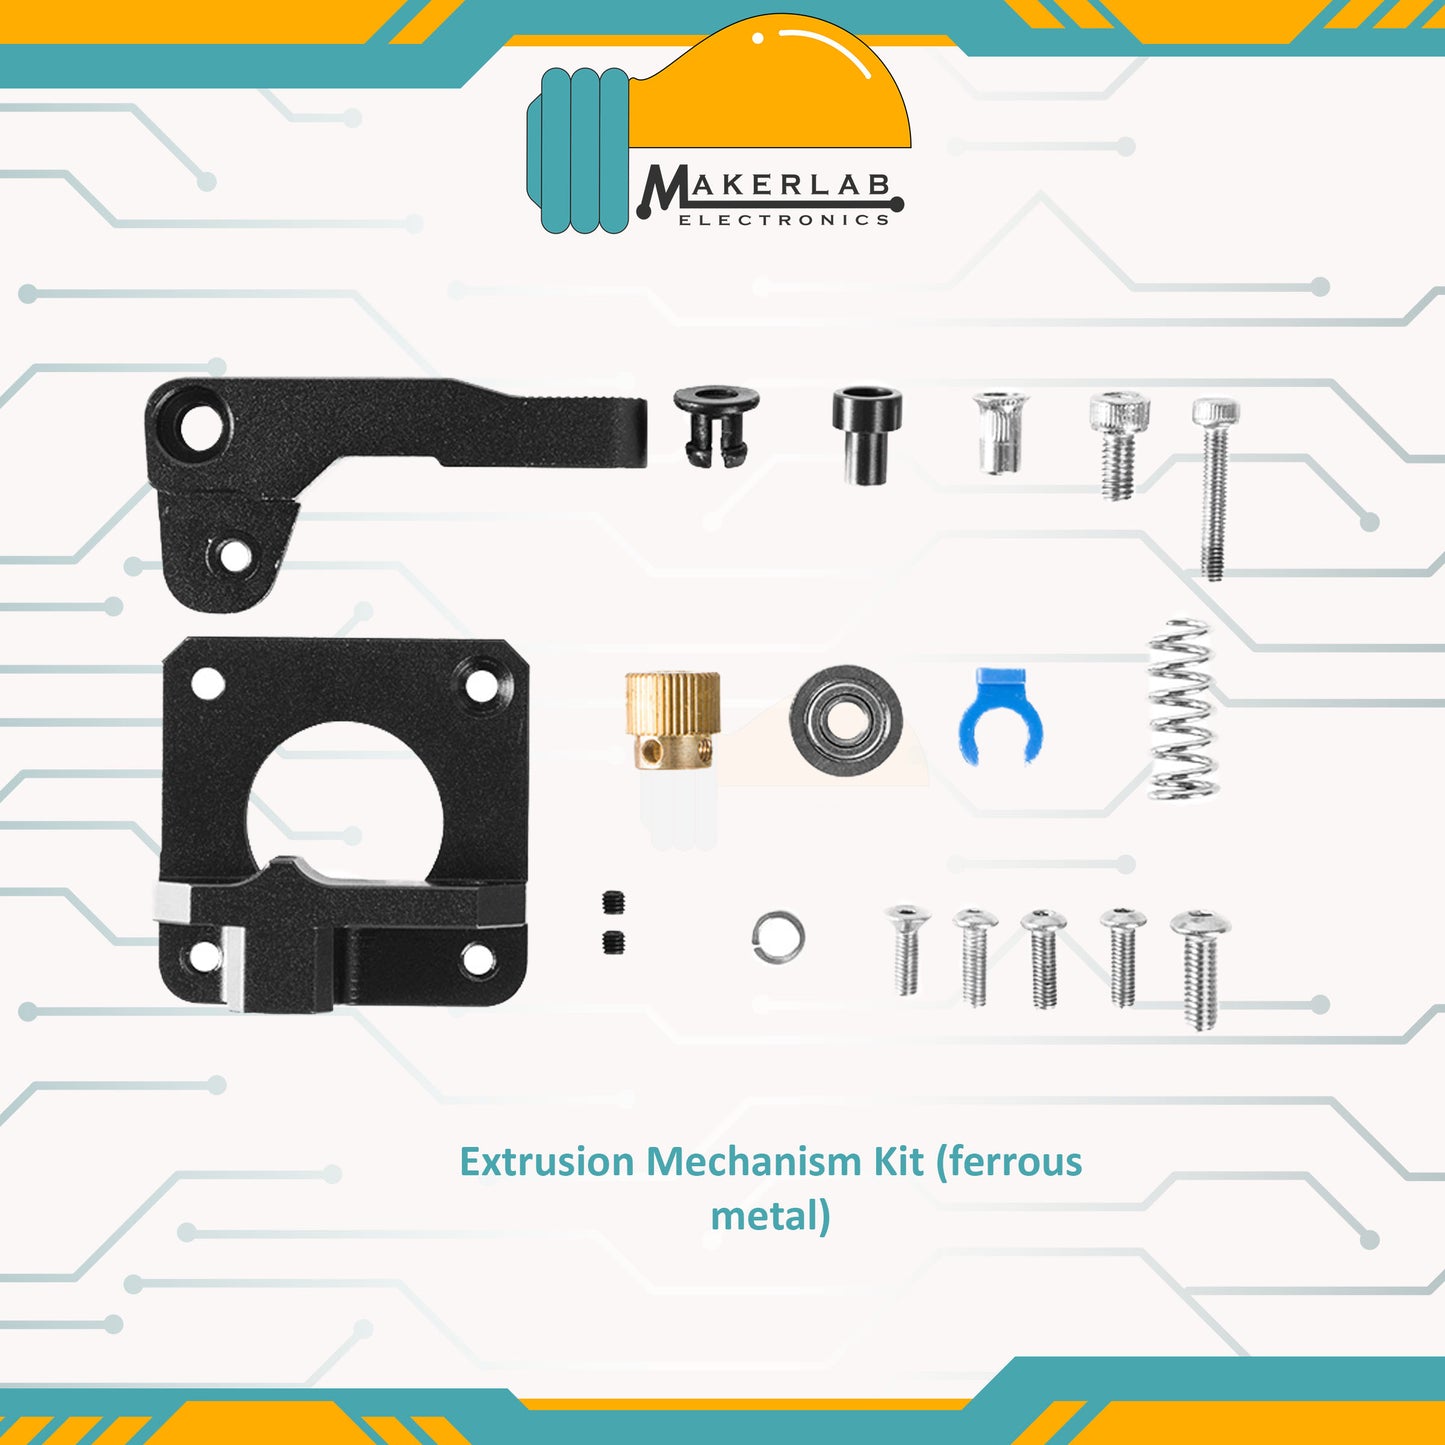 Dual Gear Aluminum Extruder Gear Kit | Upgraded Extruder Kit for Ender 3 | CR10 Series